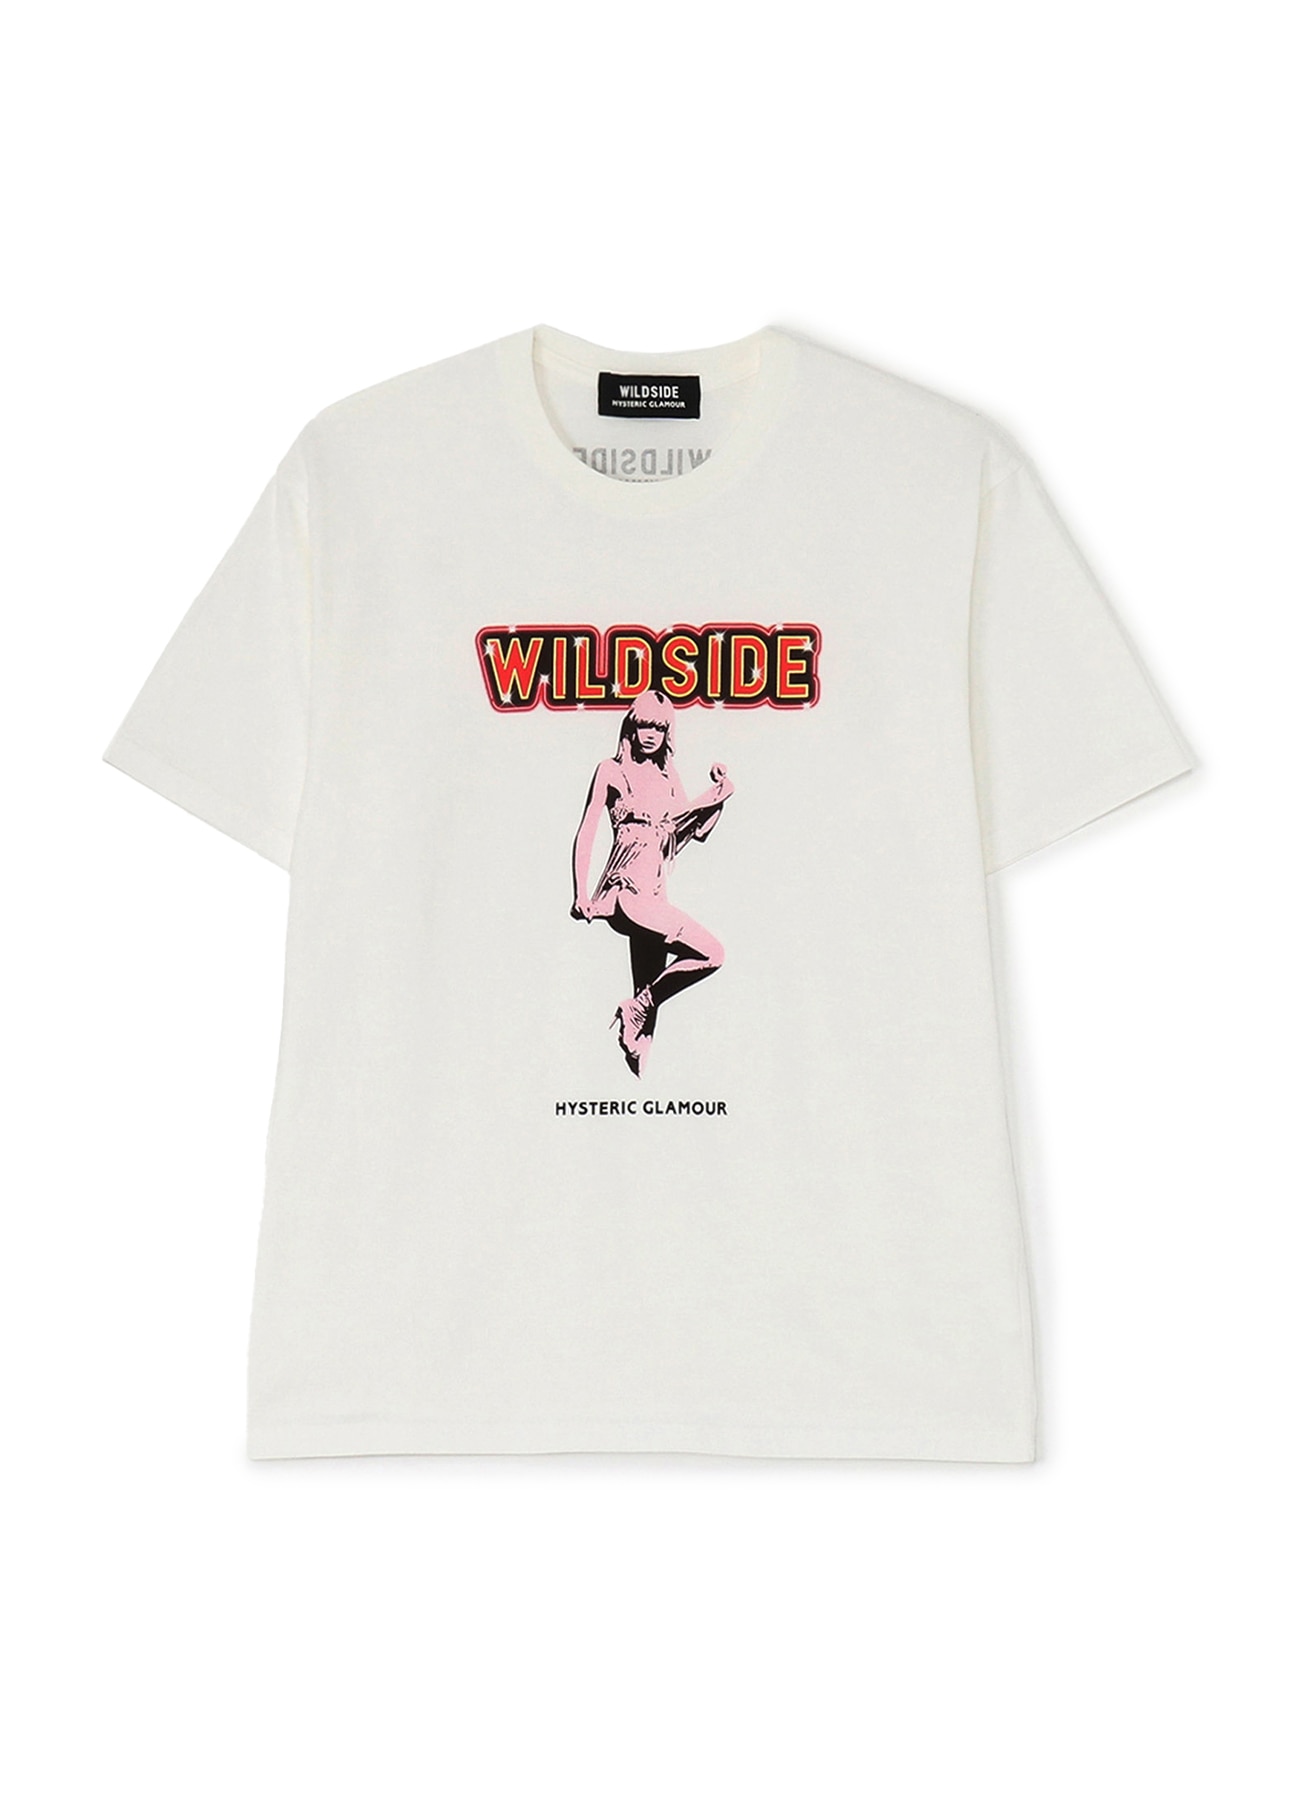 WILDSIDE × HYSTERIC GLAMOUR ”GOODNIGHT LADIES” T-shirt